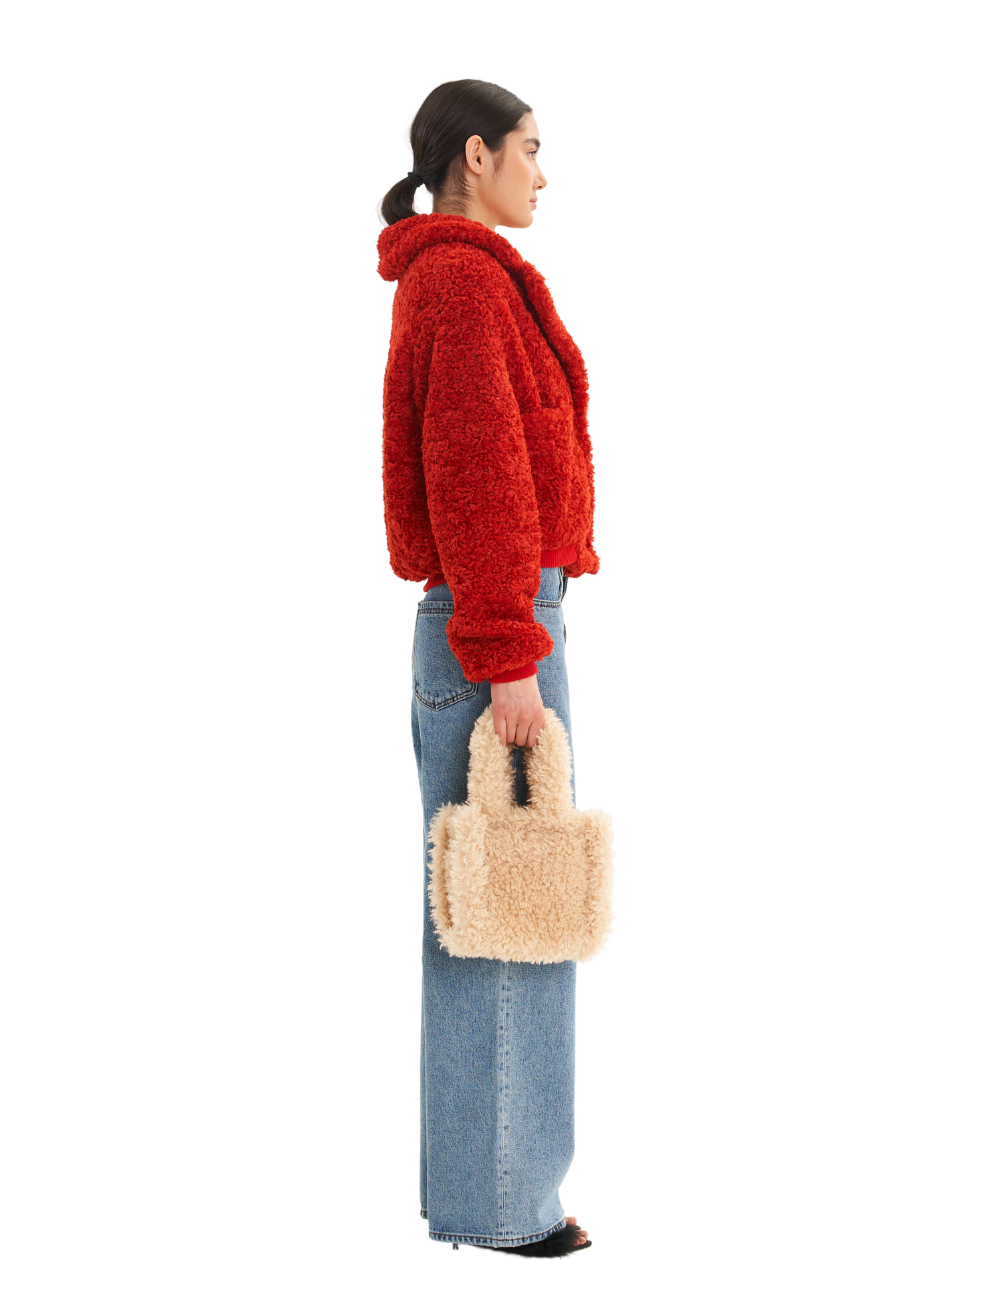 Romeo Bright Red Cruelty Free Upcycled Vegan Sherpa Cropped Teddy Coat